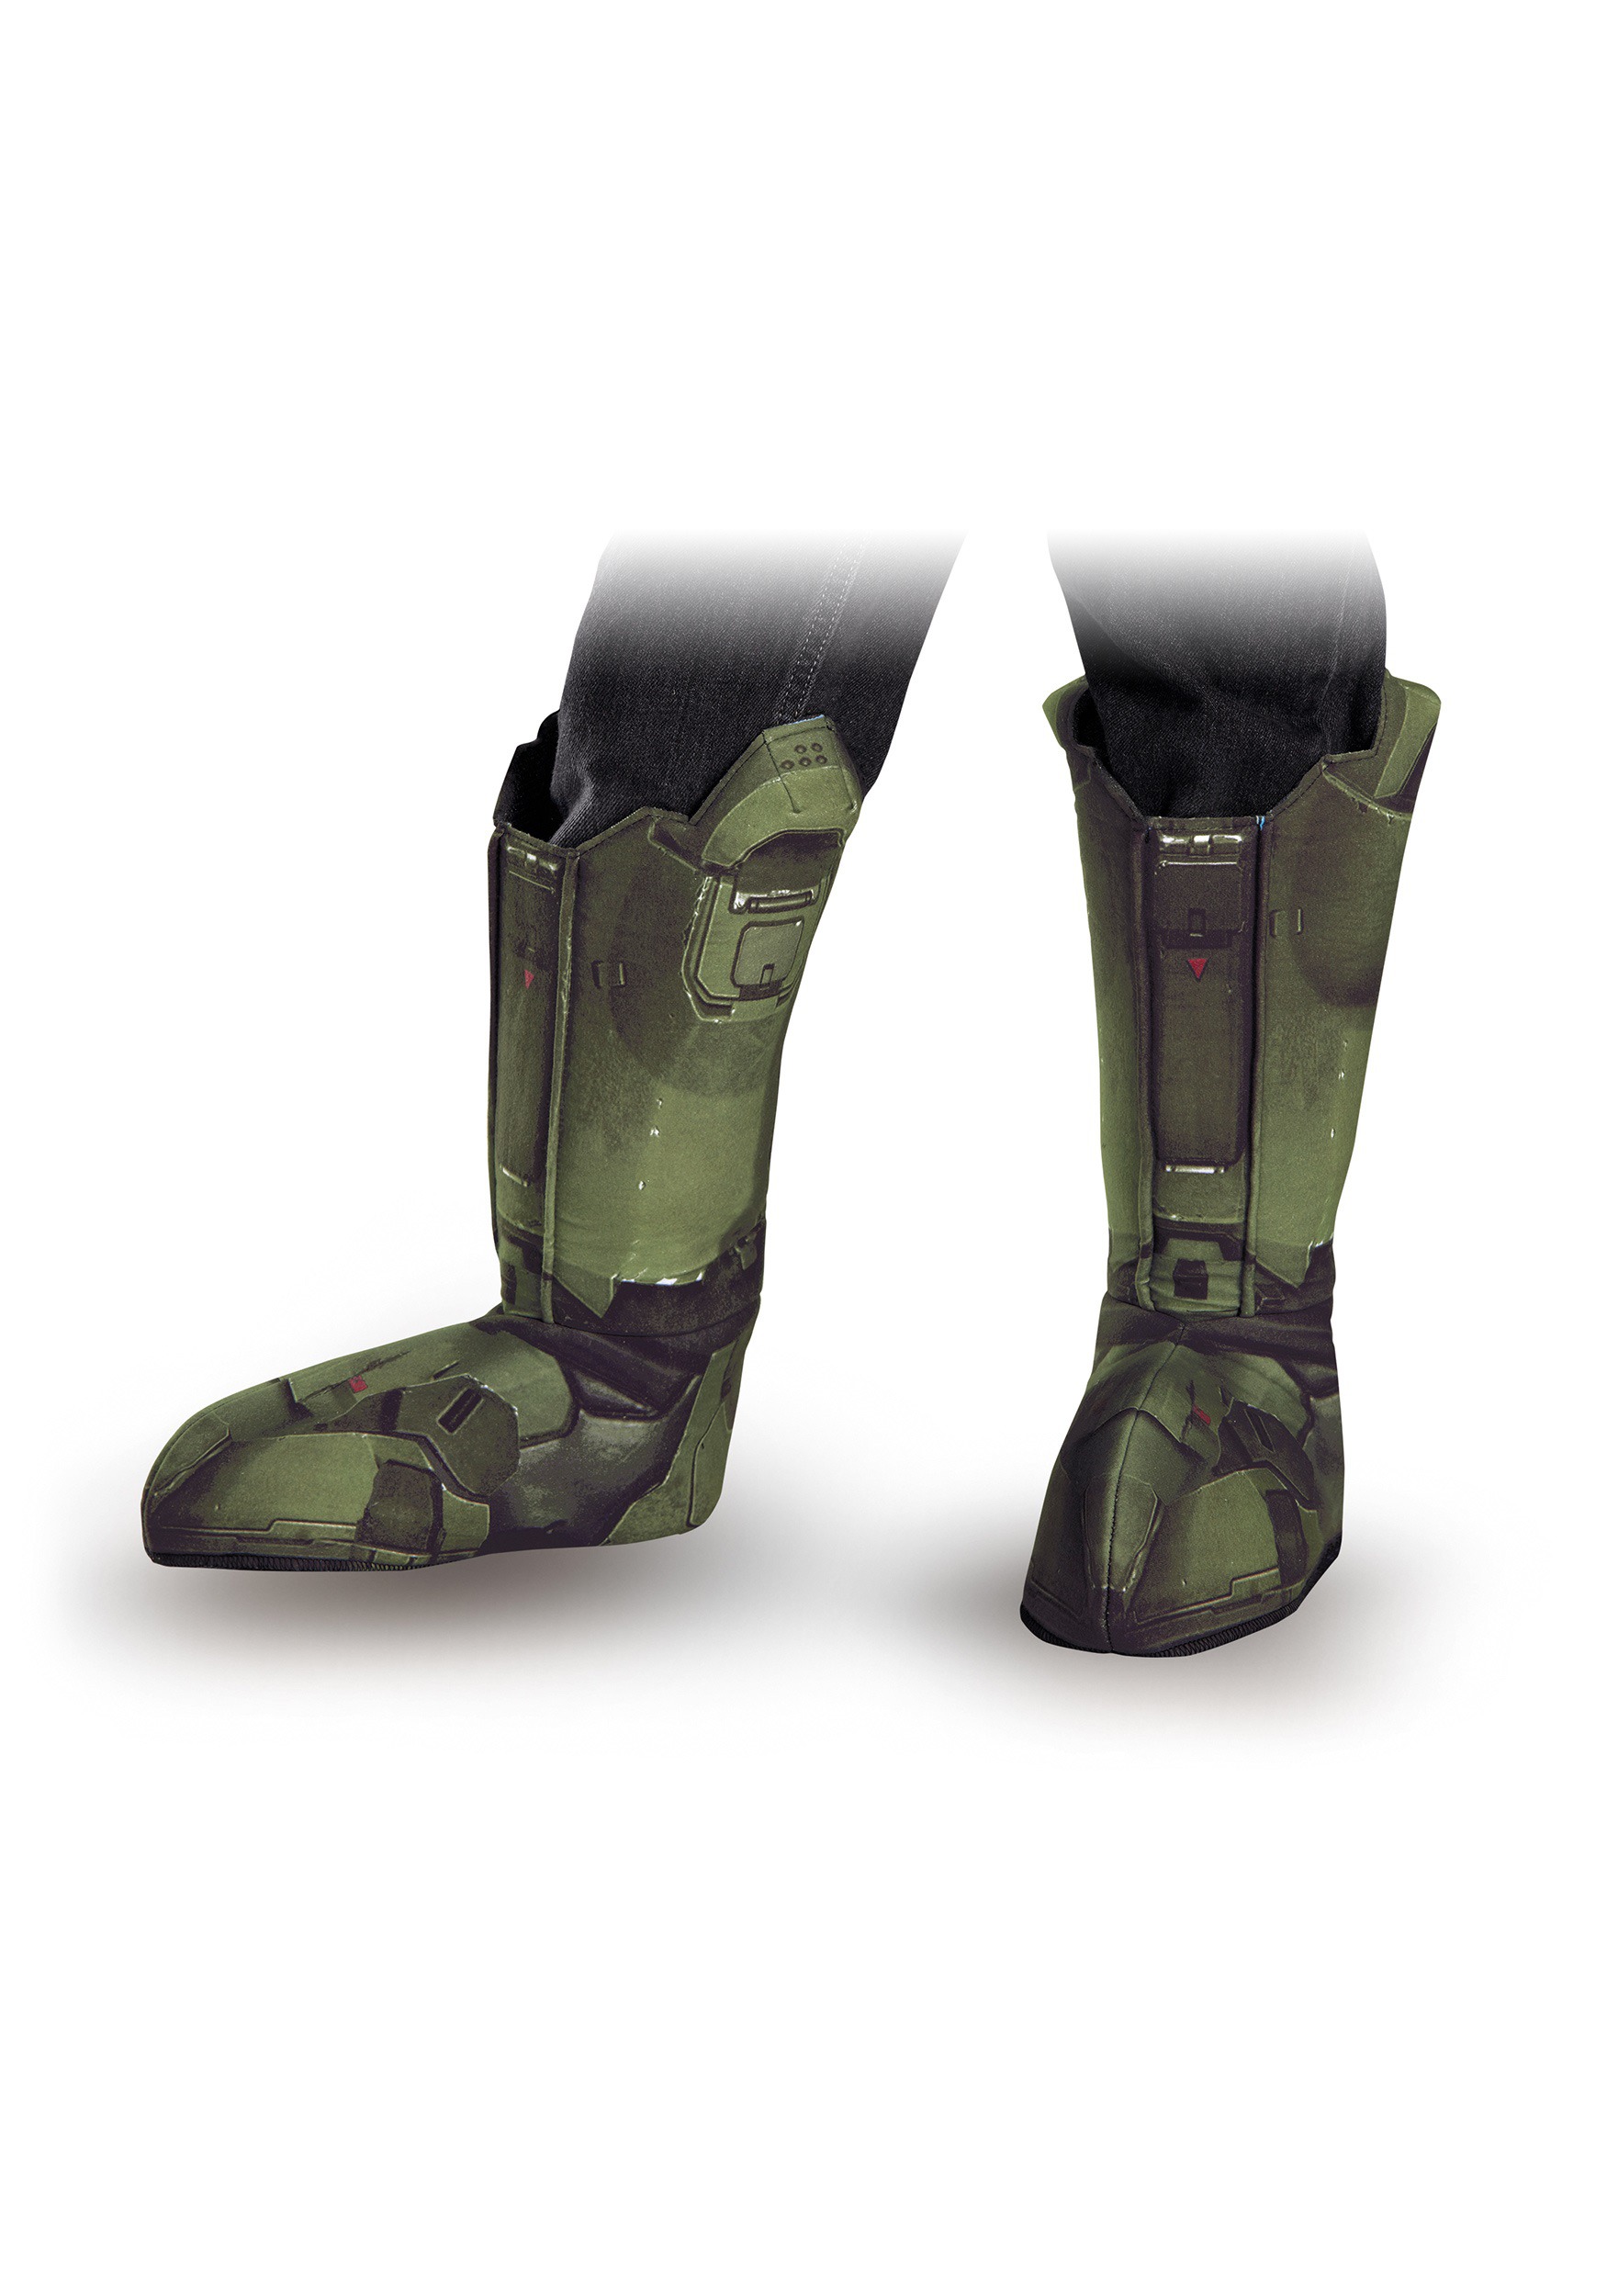 Adult Master Chief Boot Covers